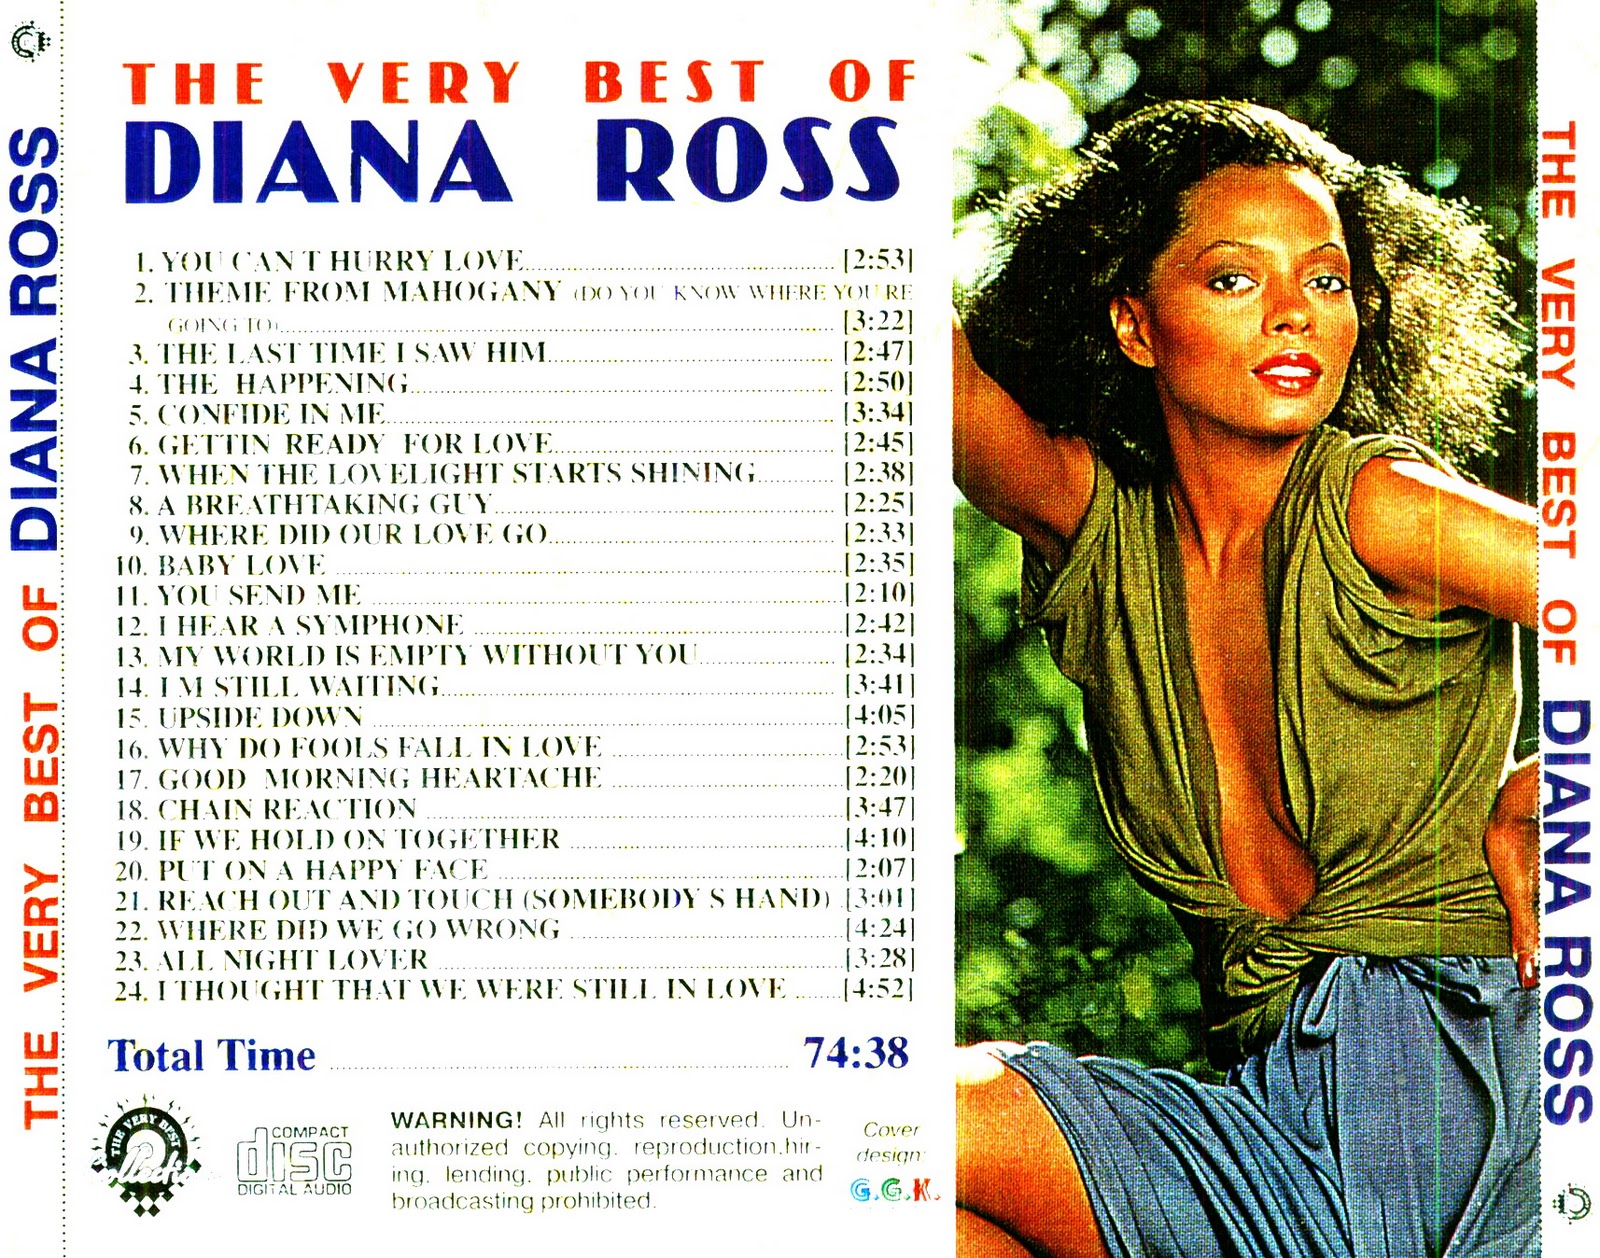 DIANA ROSS - The Very Best Of.